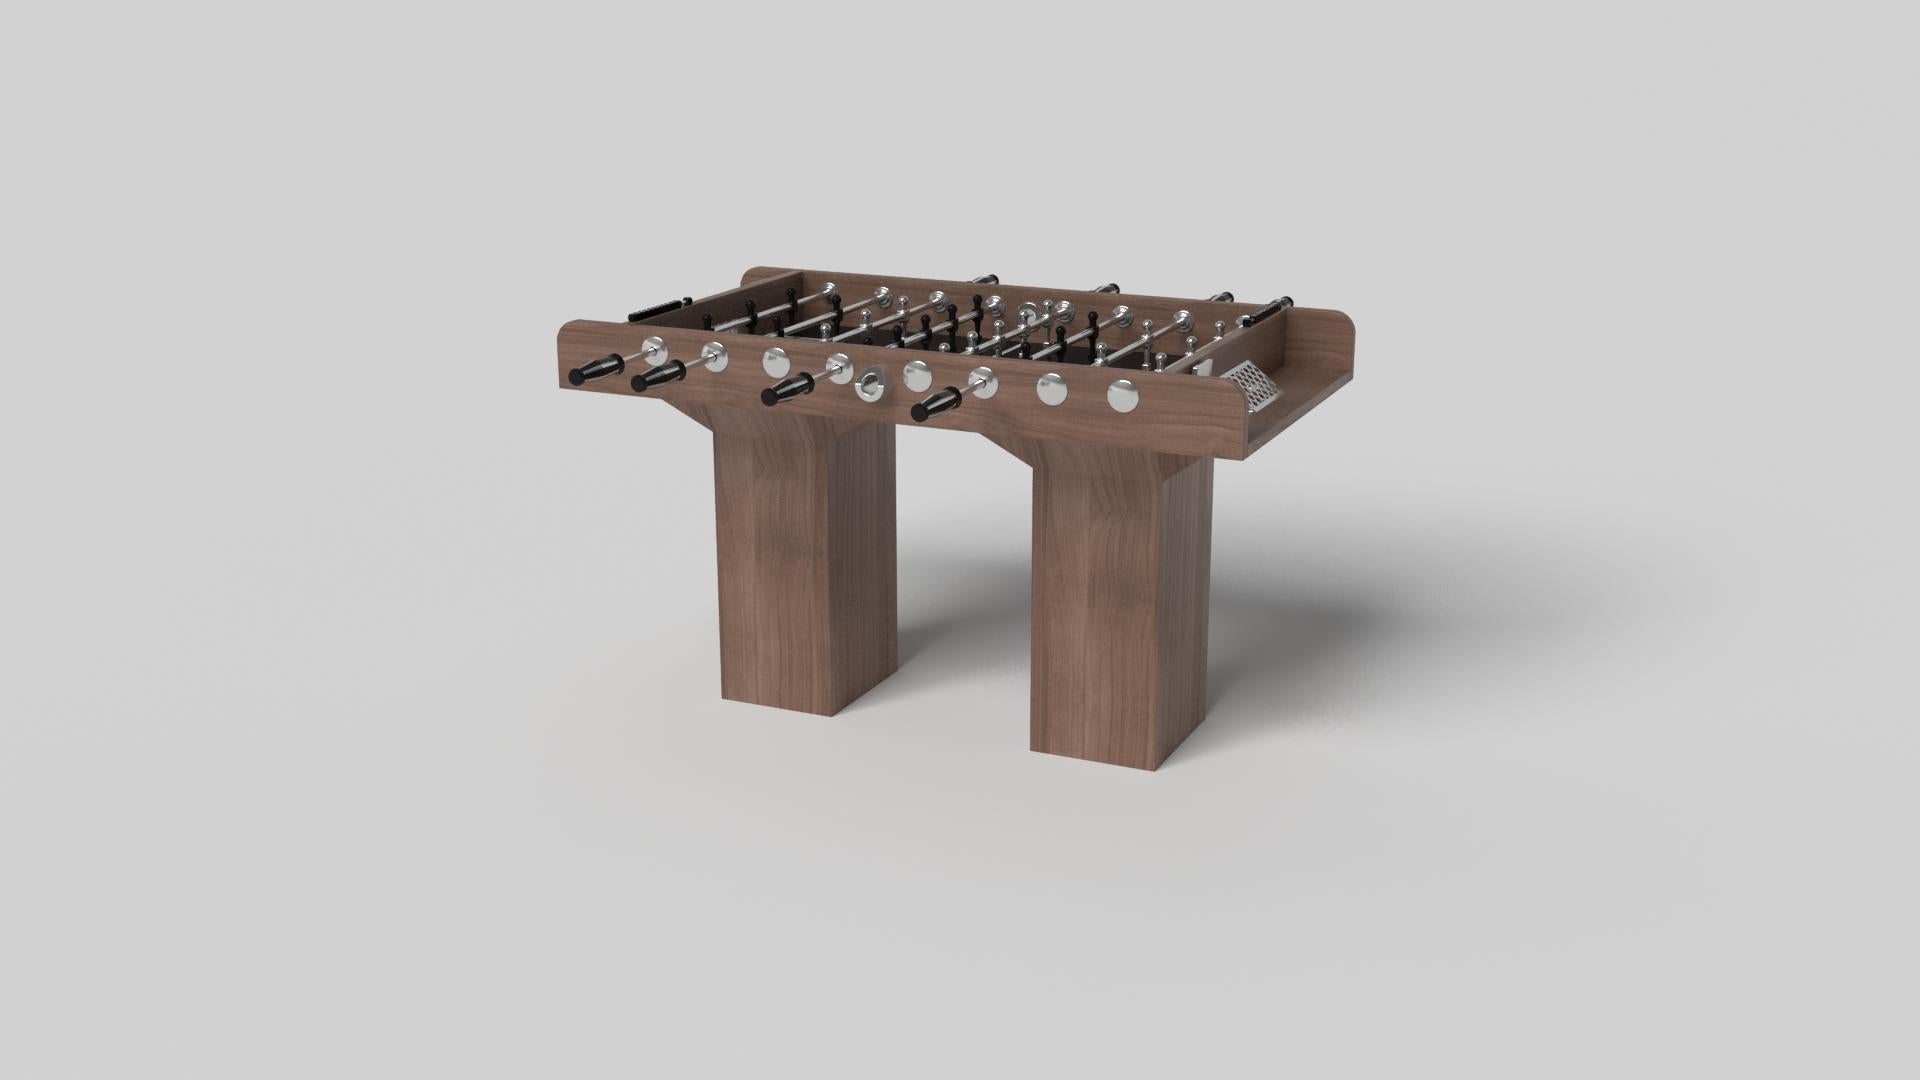 Minimalist design meets opulent elegance in the Trestle foosball table. Detailed with a professional surface for endless game play, this contemporary table is expertly crafted. Square block legs give it a stark, geometric look that contributes to